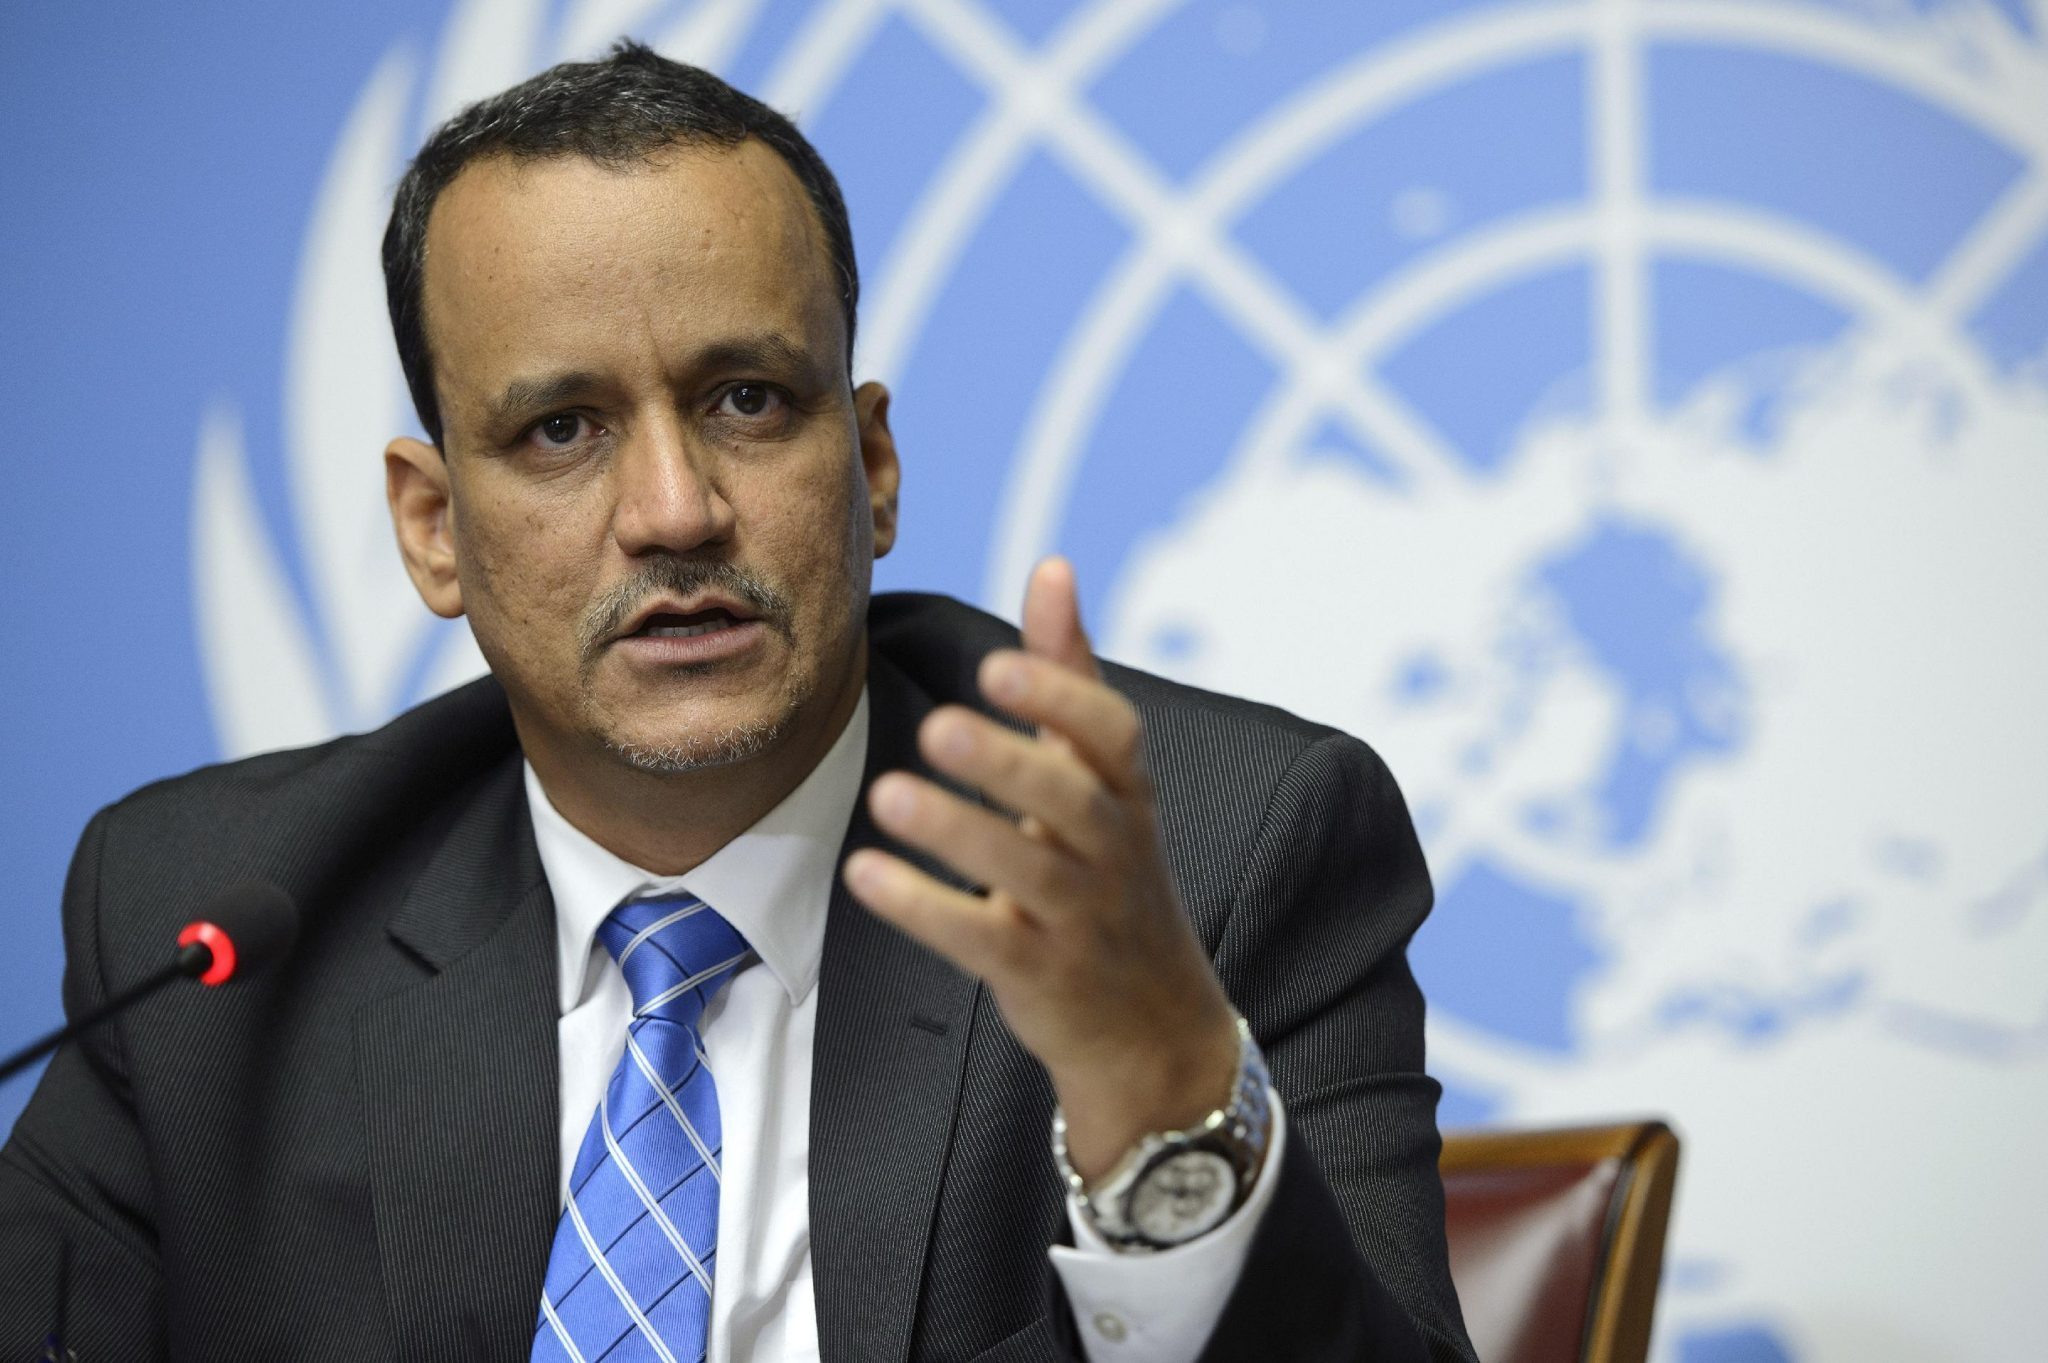 UN: Yemen peace talks suspended for one month